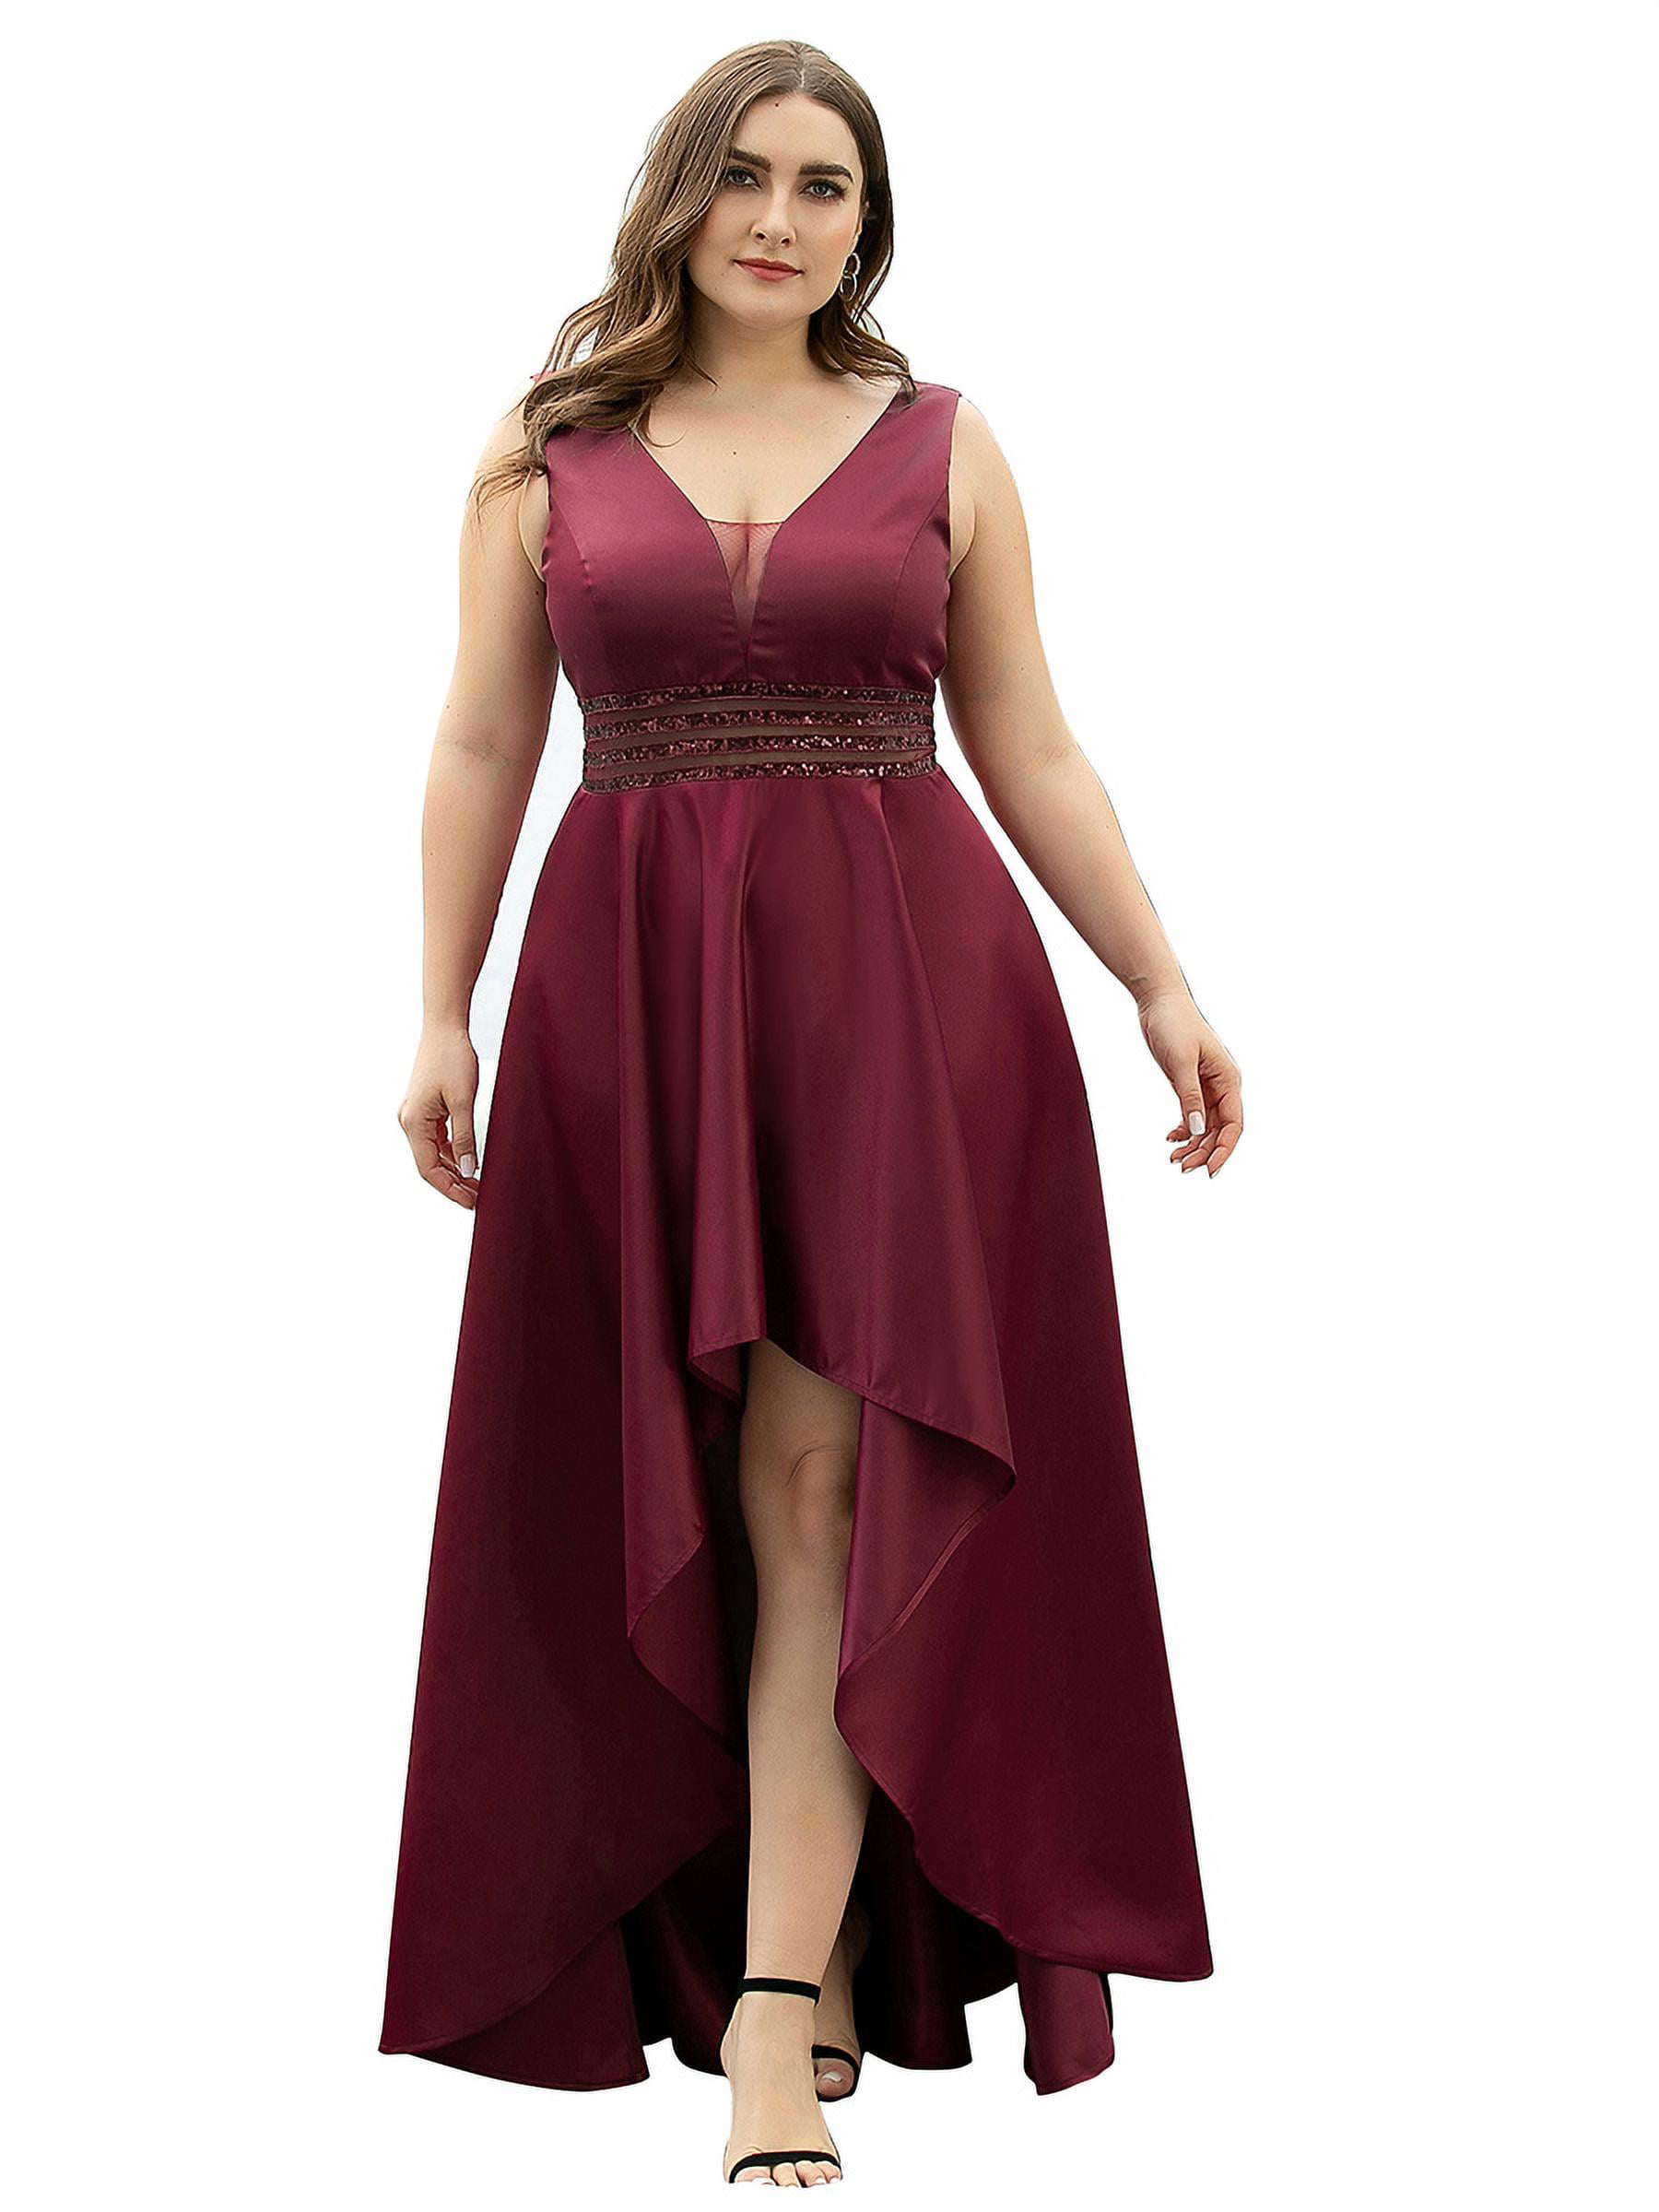 Ever-Pretty V-Neck Women's Sleeveless High Low Cocktail Party Evening Maxi Dress 